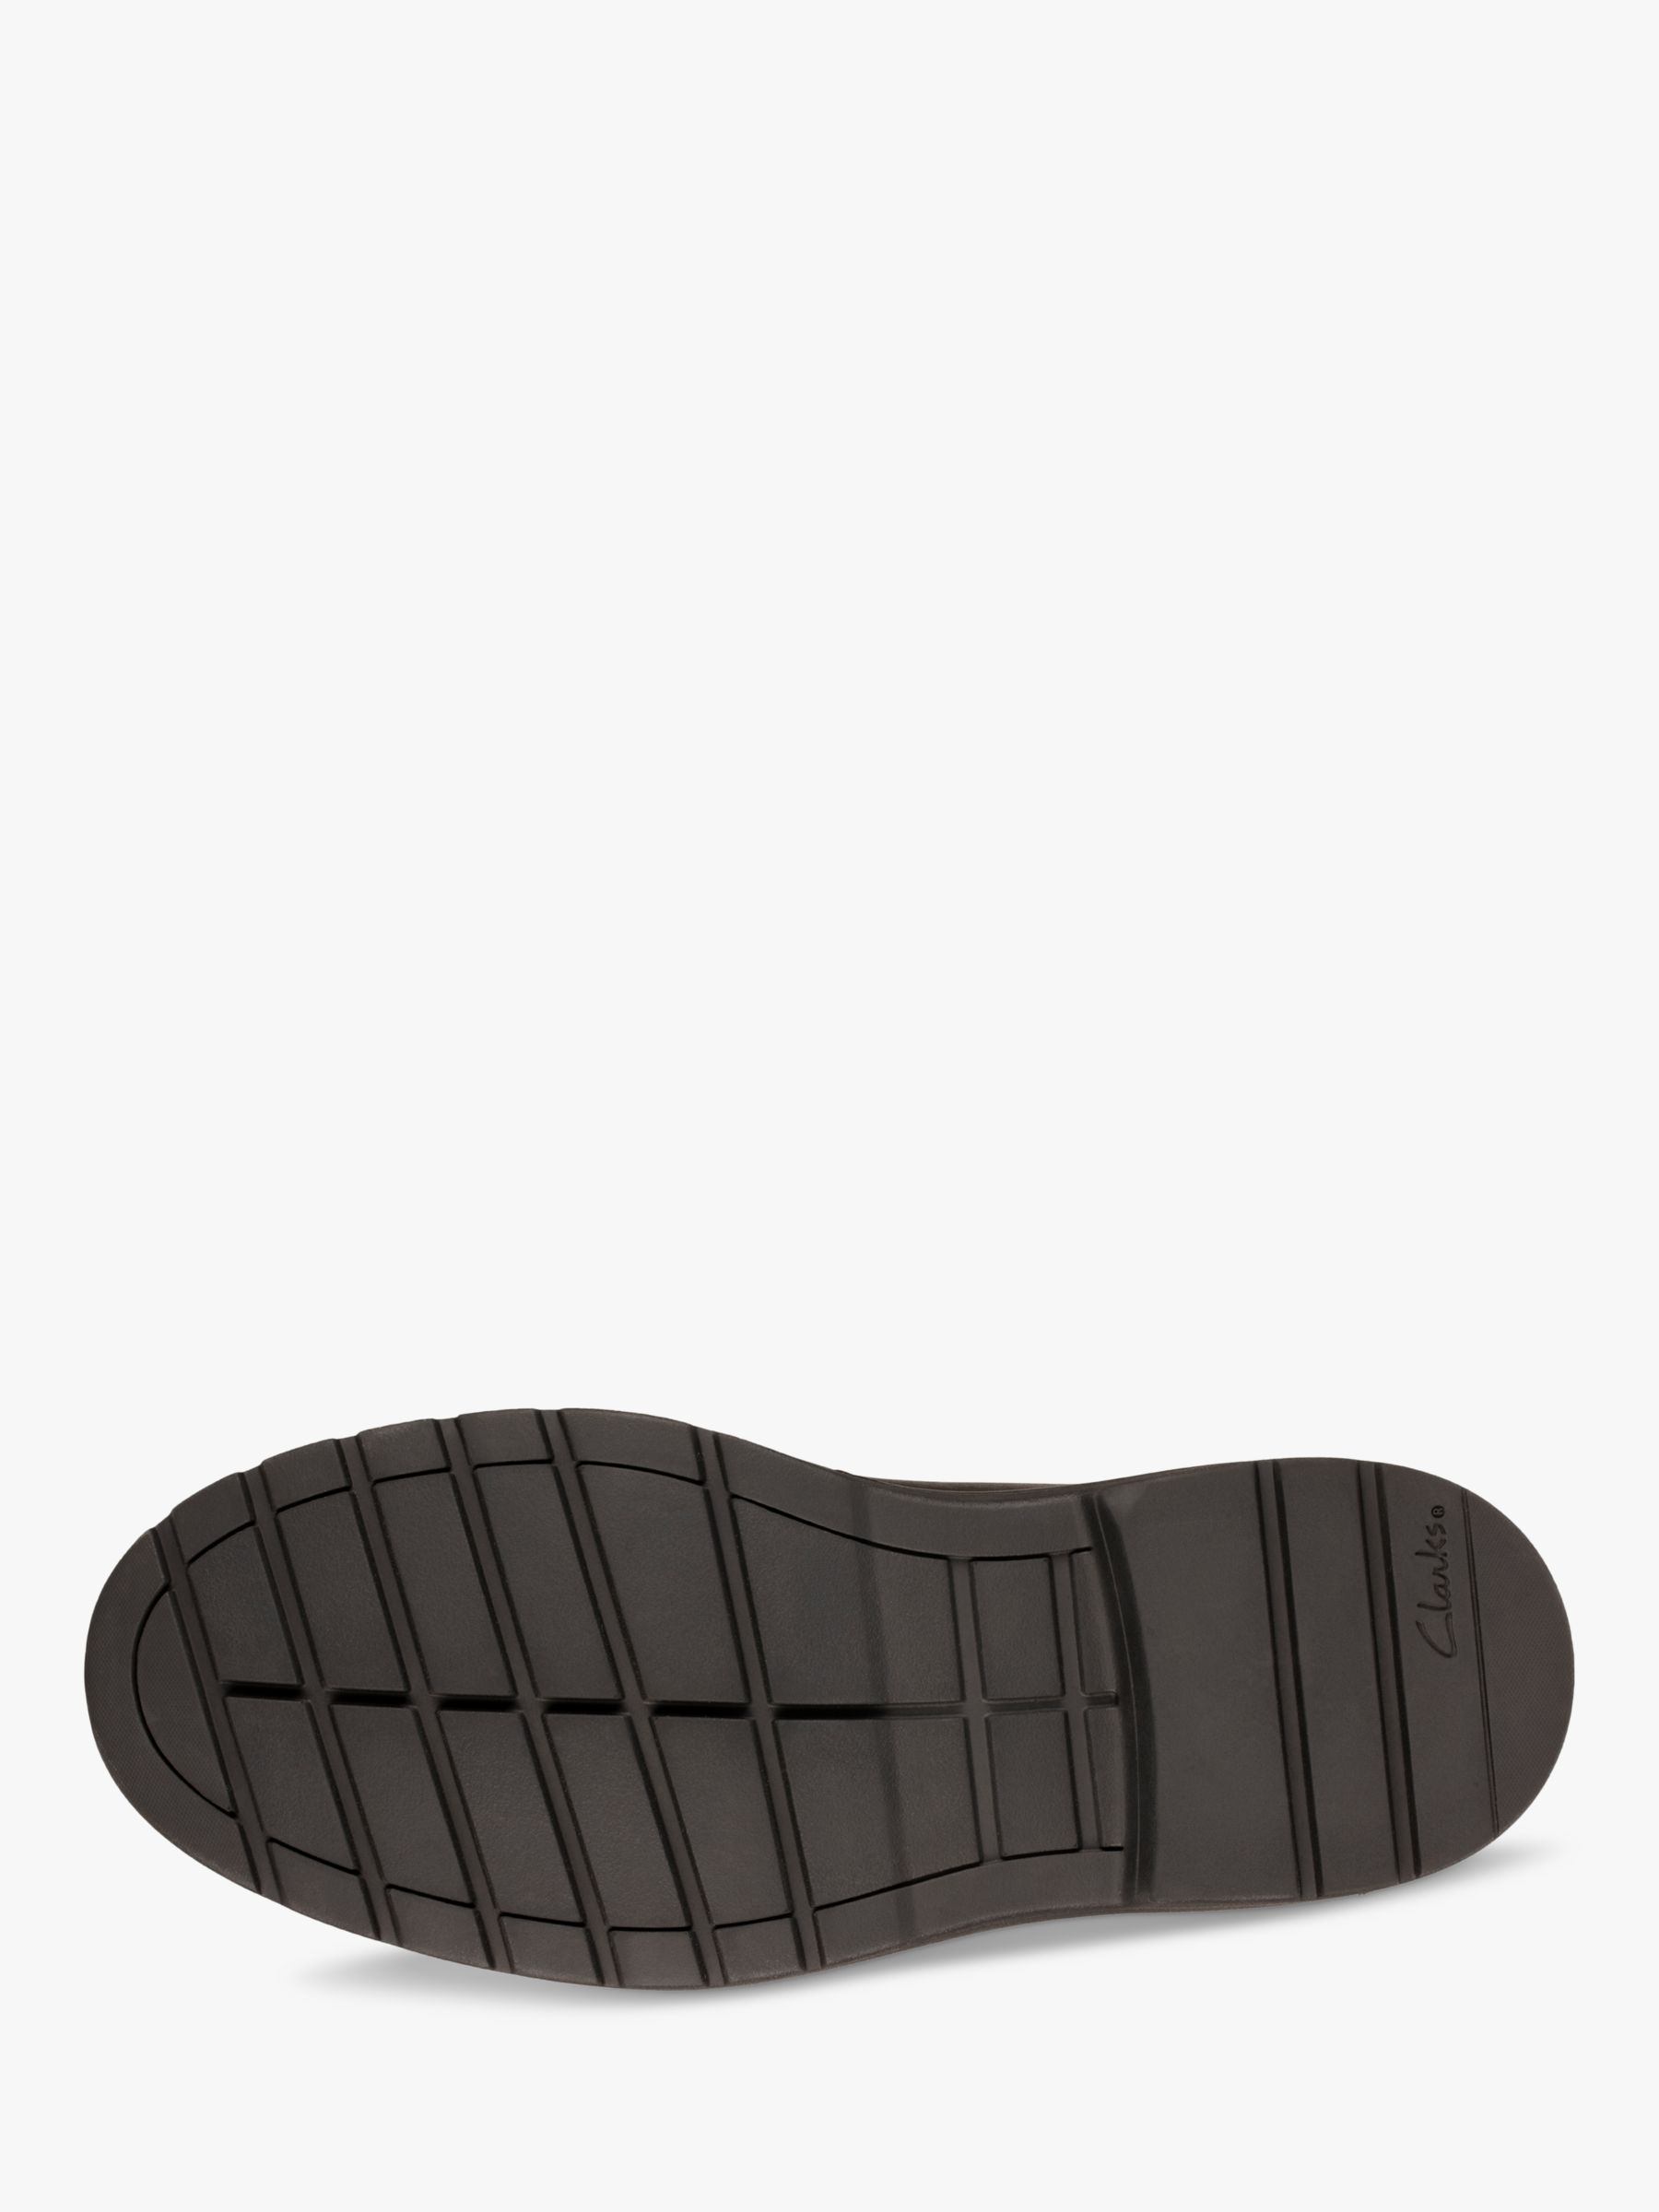 Clarks Kids' Loxham Pace Leather School Shoes at John Lewis & Partners